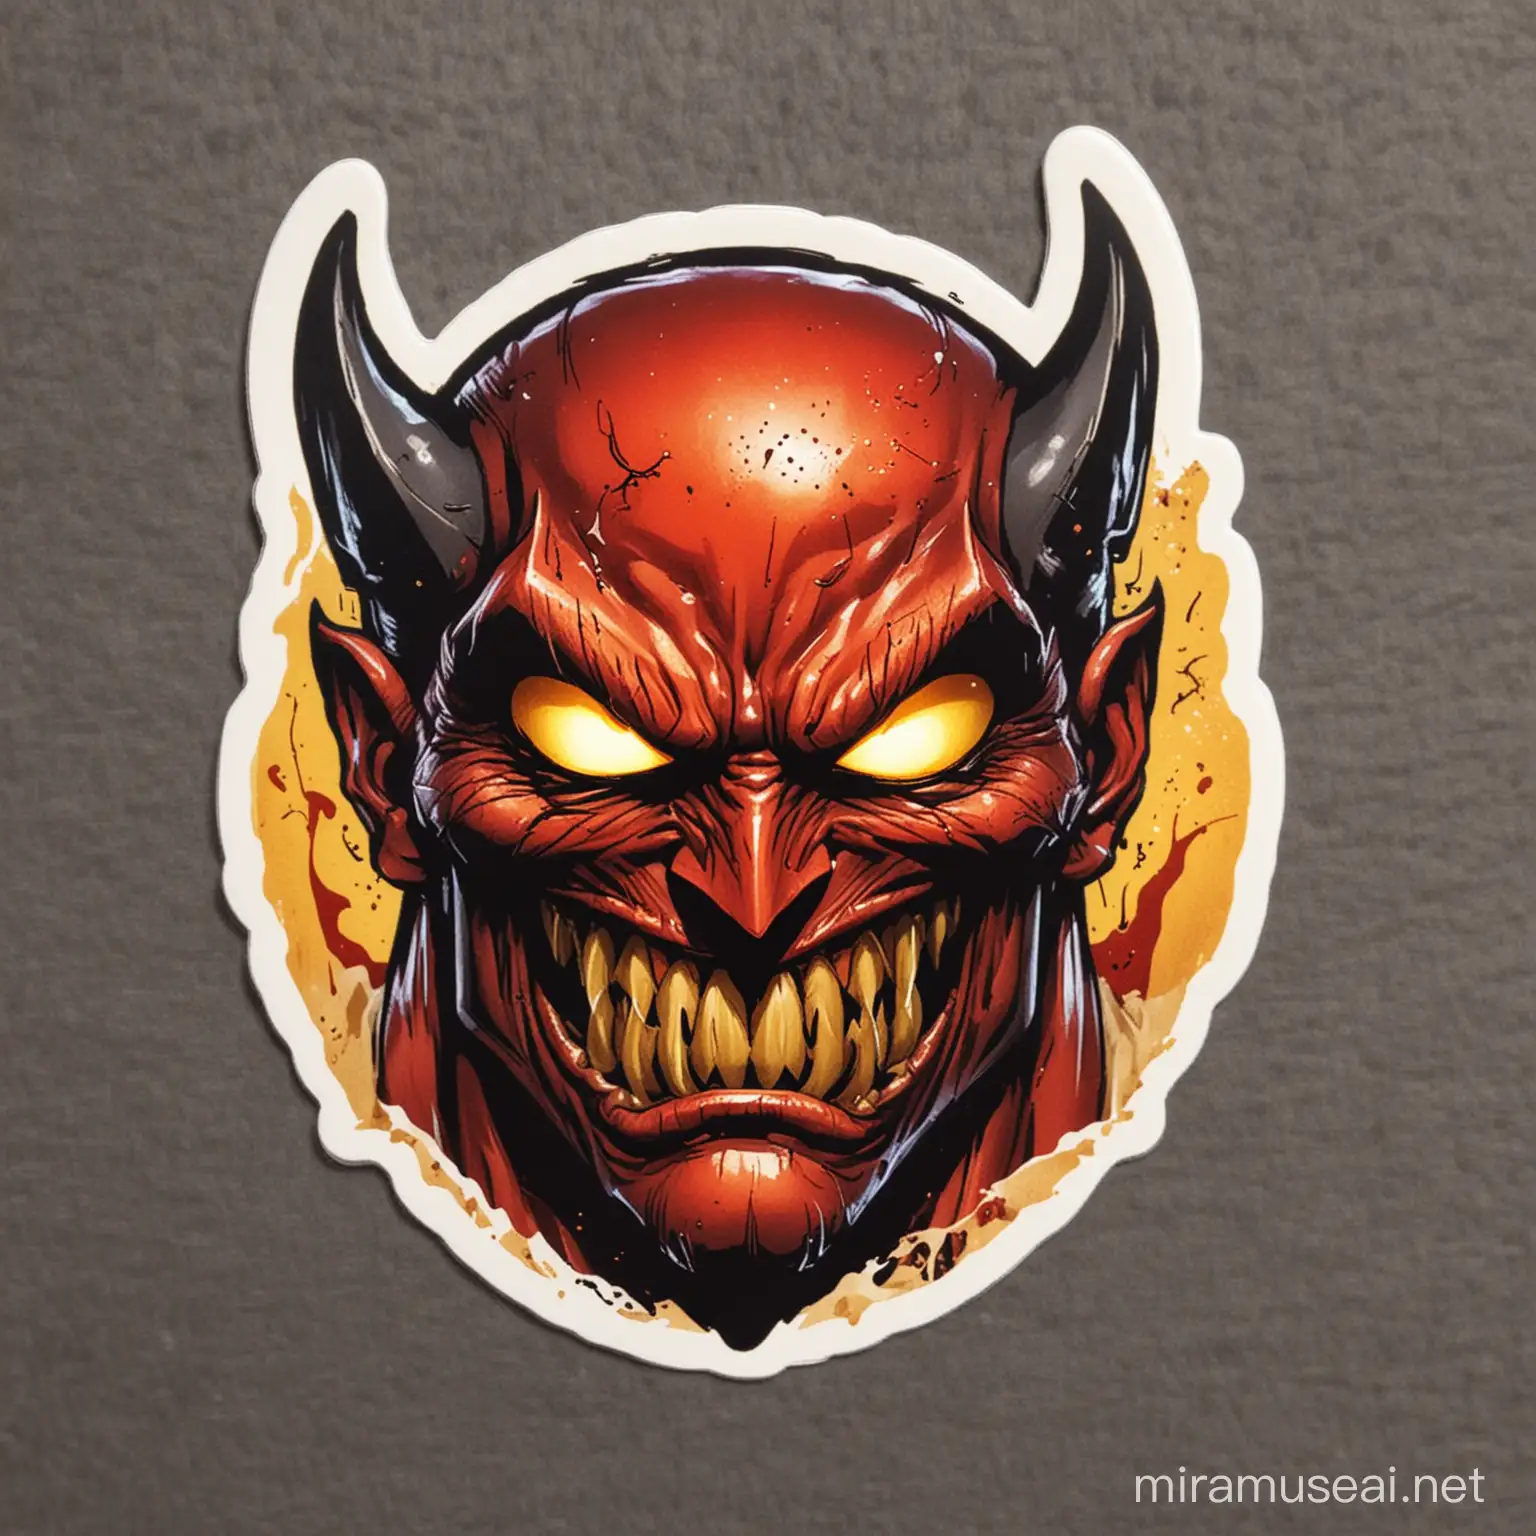 a sticker of Batman with a demon face and fangs, red skin, yellow dark eyes